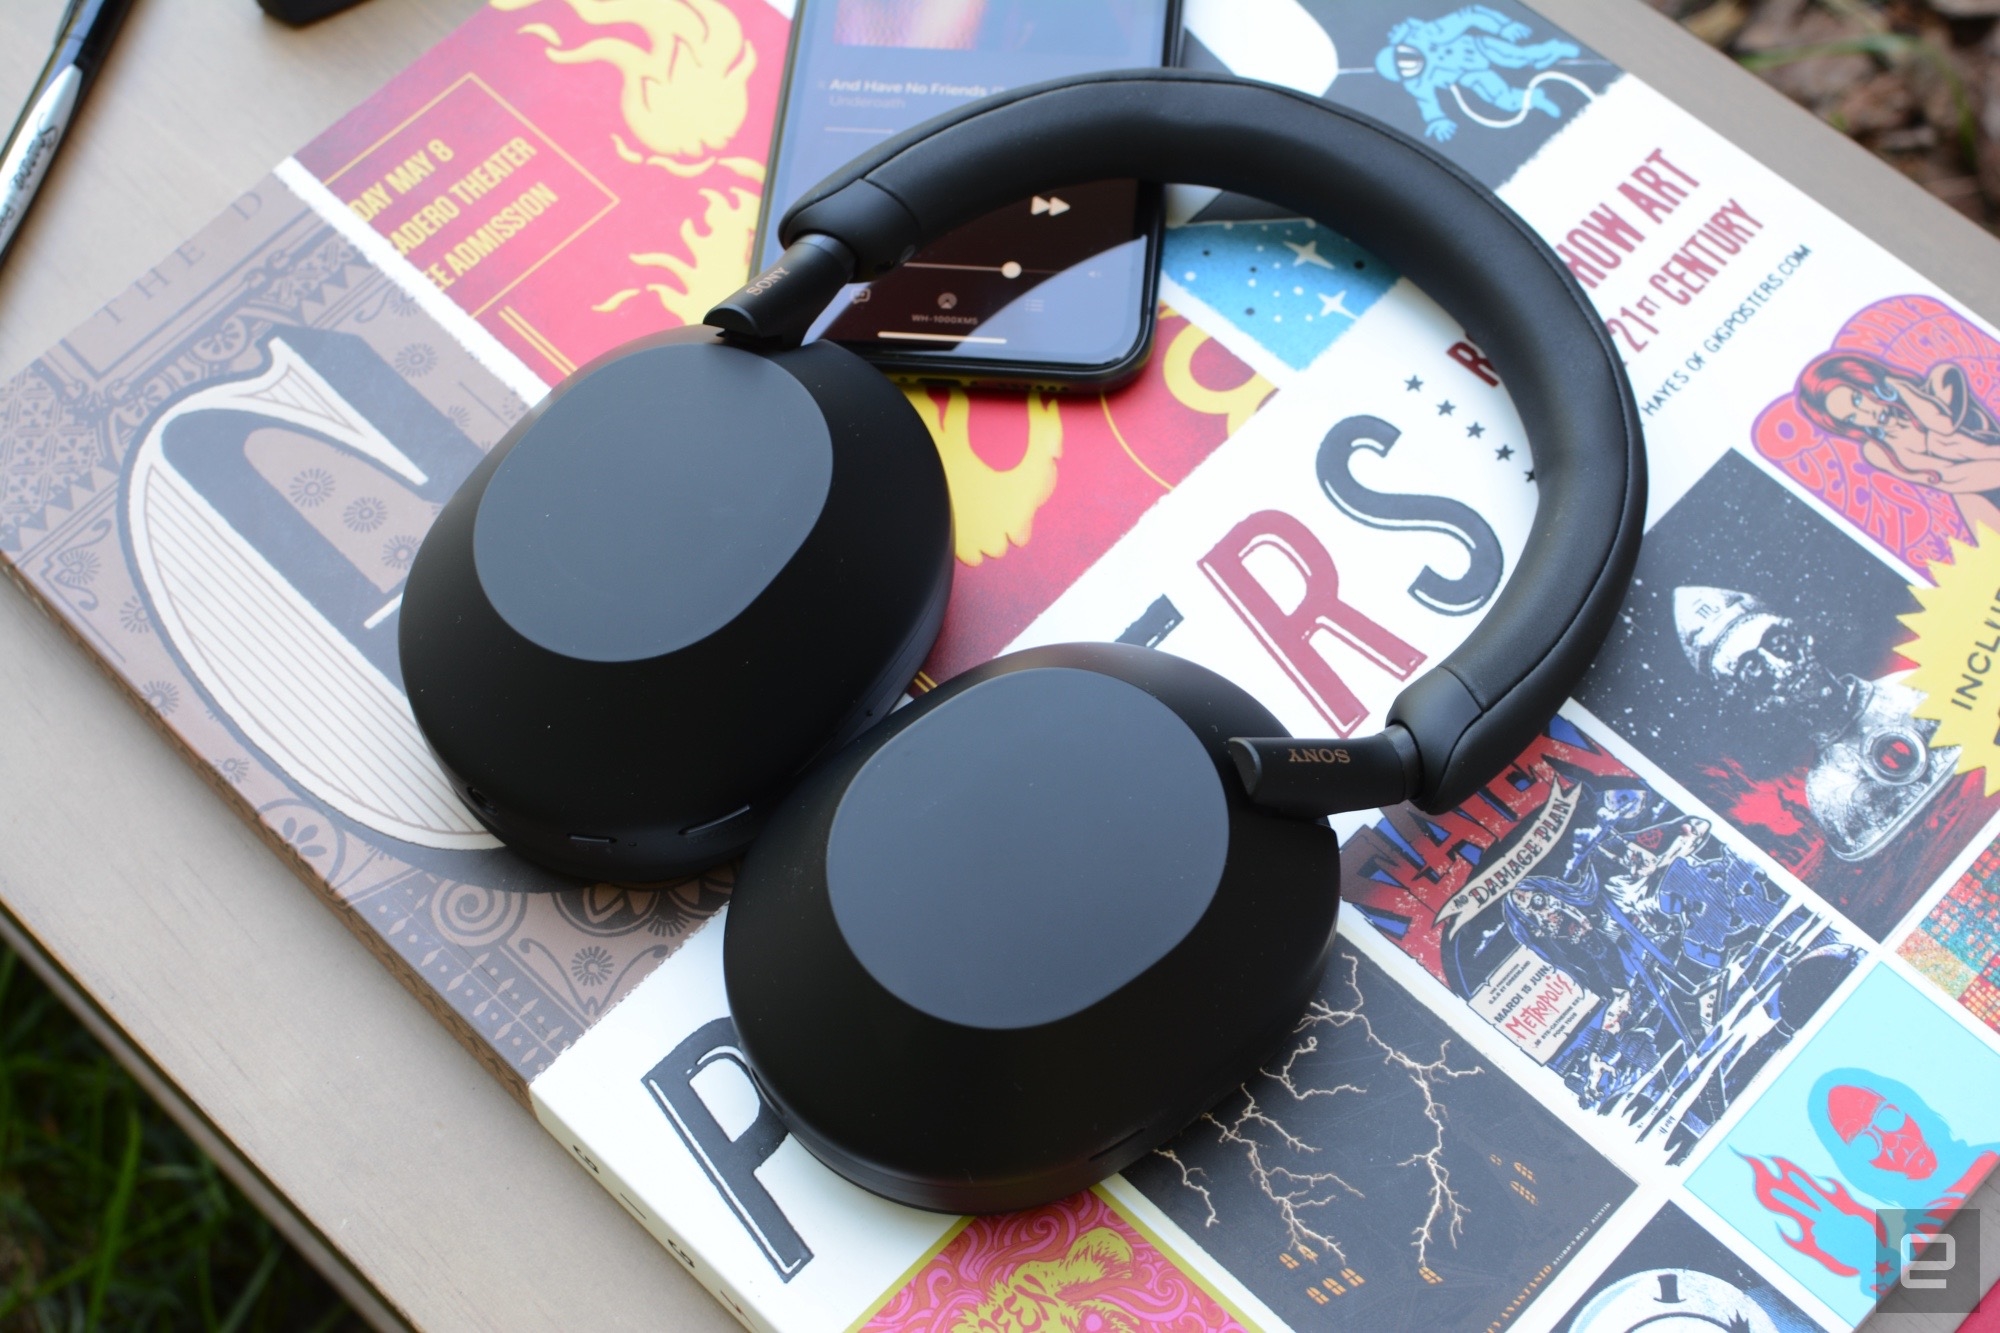 With upgrades to design, sound quality and active noise cancellation, the WH-1000XM5 keeps its place above the competition. These headphones are super comfortable as well, and 30-hour battery life is more than adequate. The M5 makes it clear that Sony won’t be dethroned anytime soon. | DeviceDaily.com